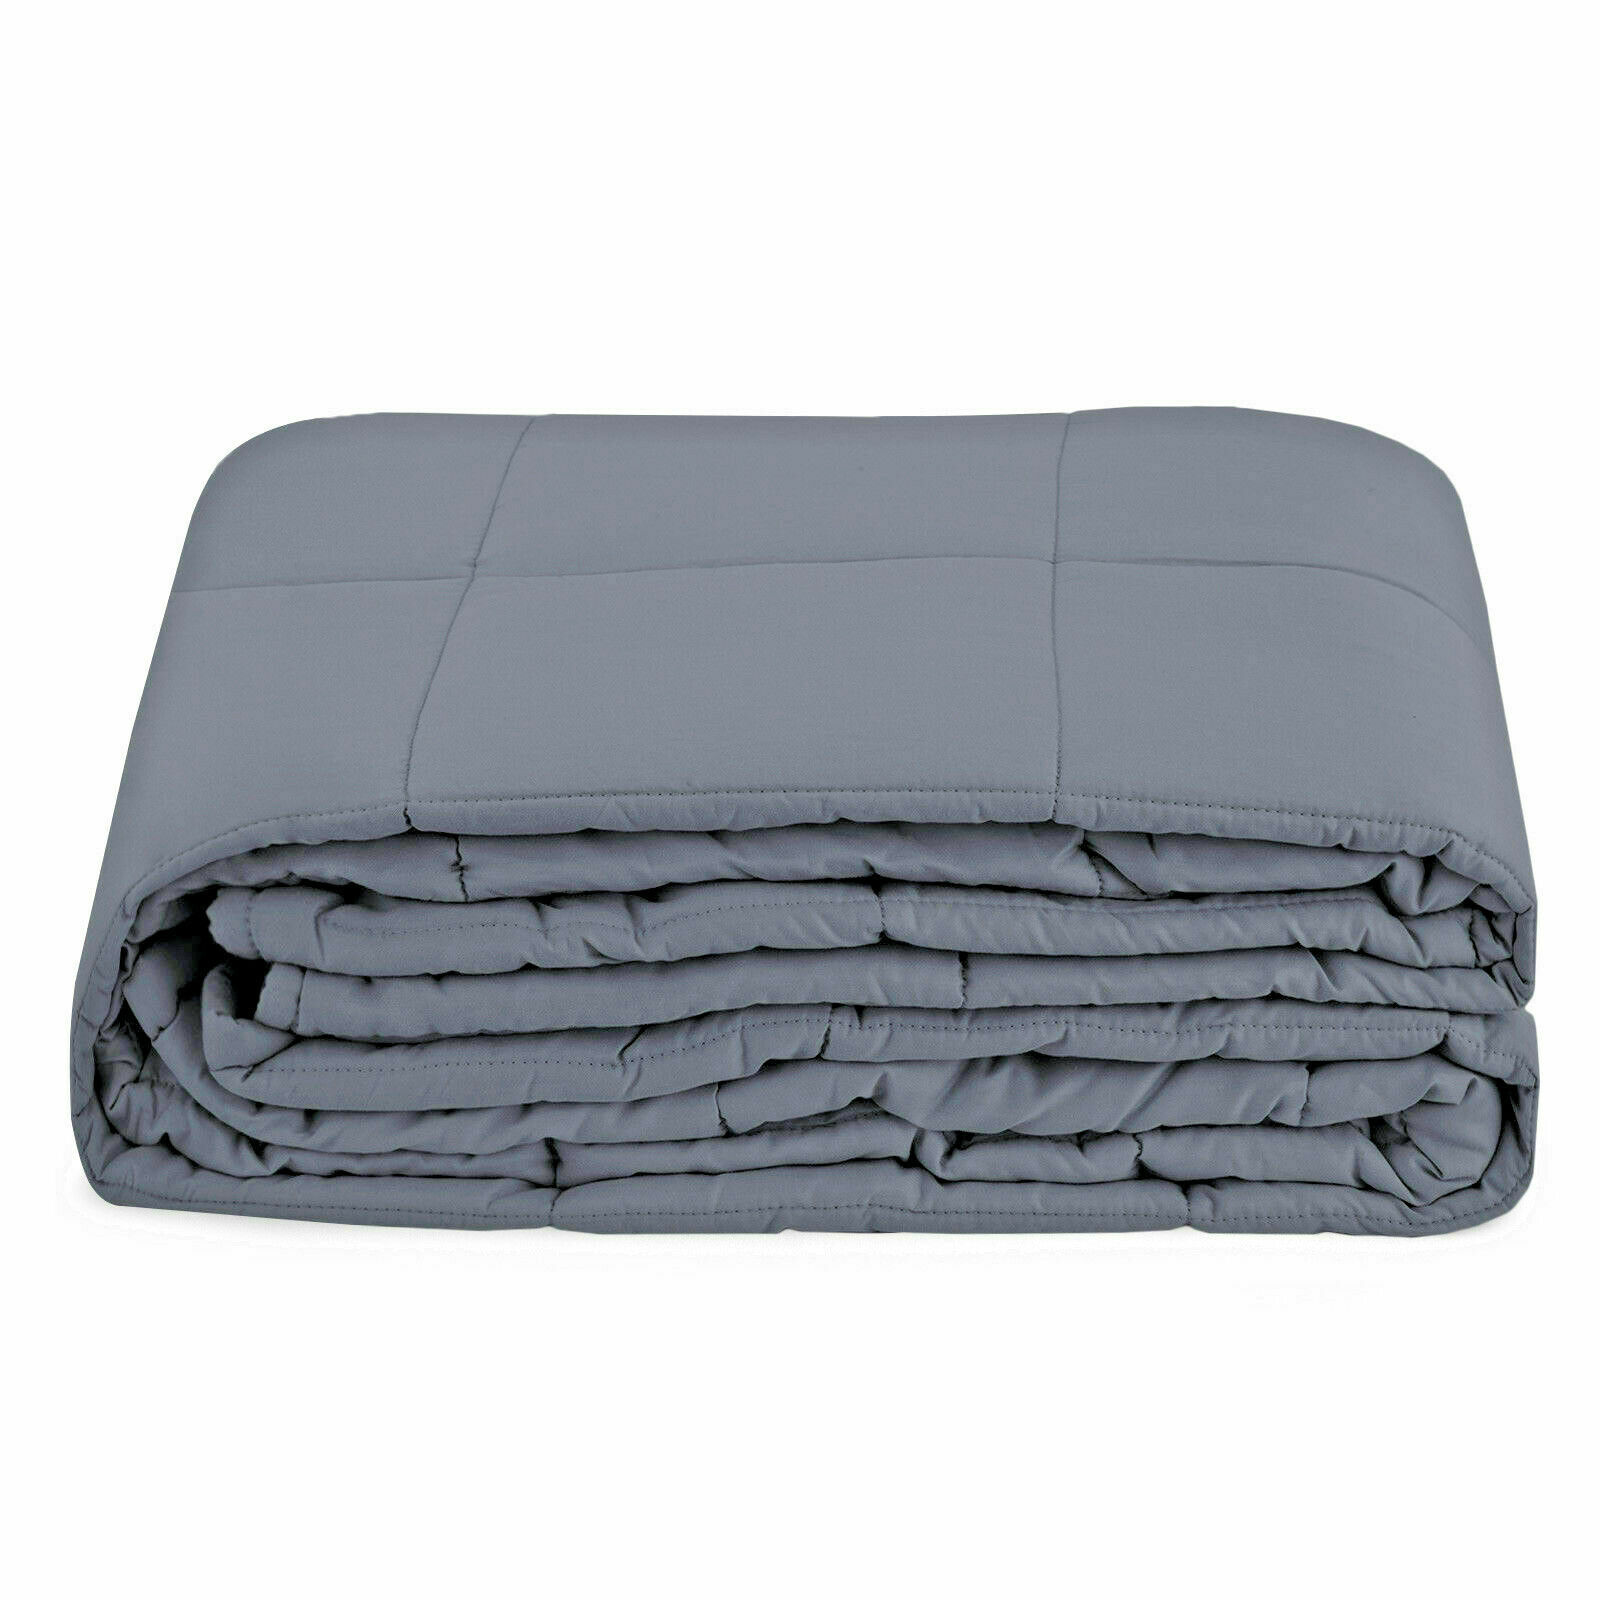 Weighted Blanket Anxiety Adult 40x60 48x72 60x80 78x80 72x84 7-25 lbs